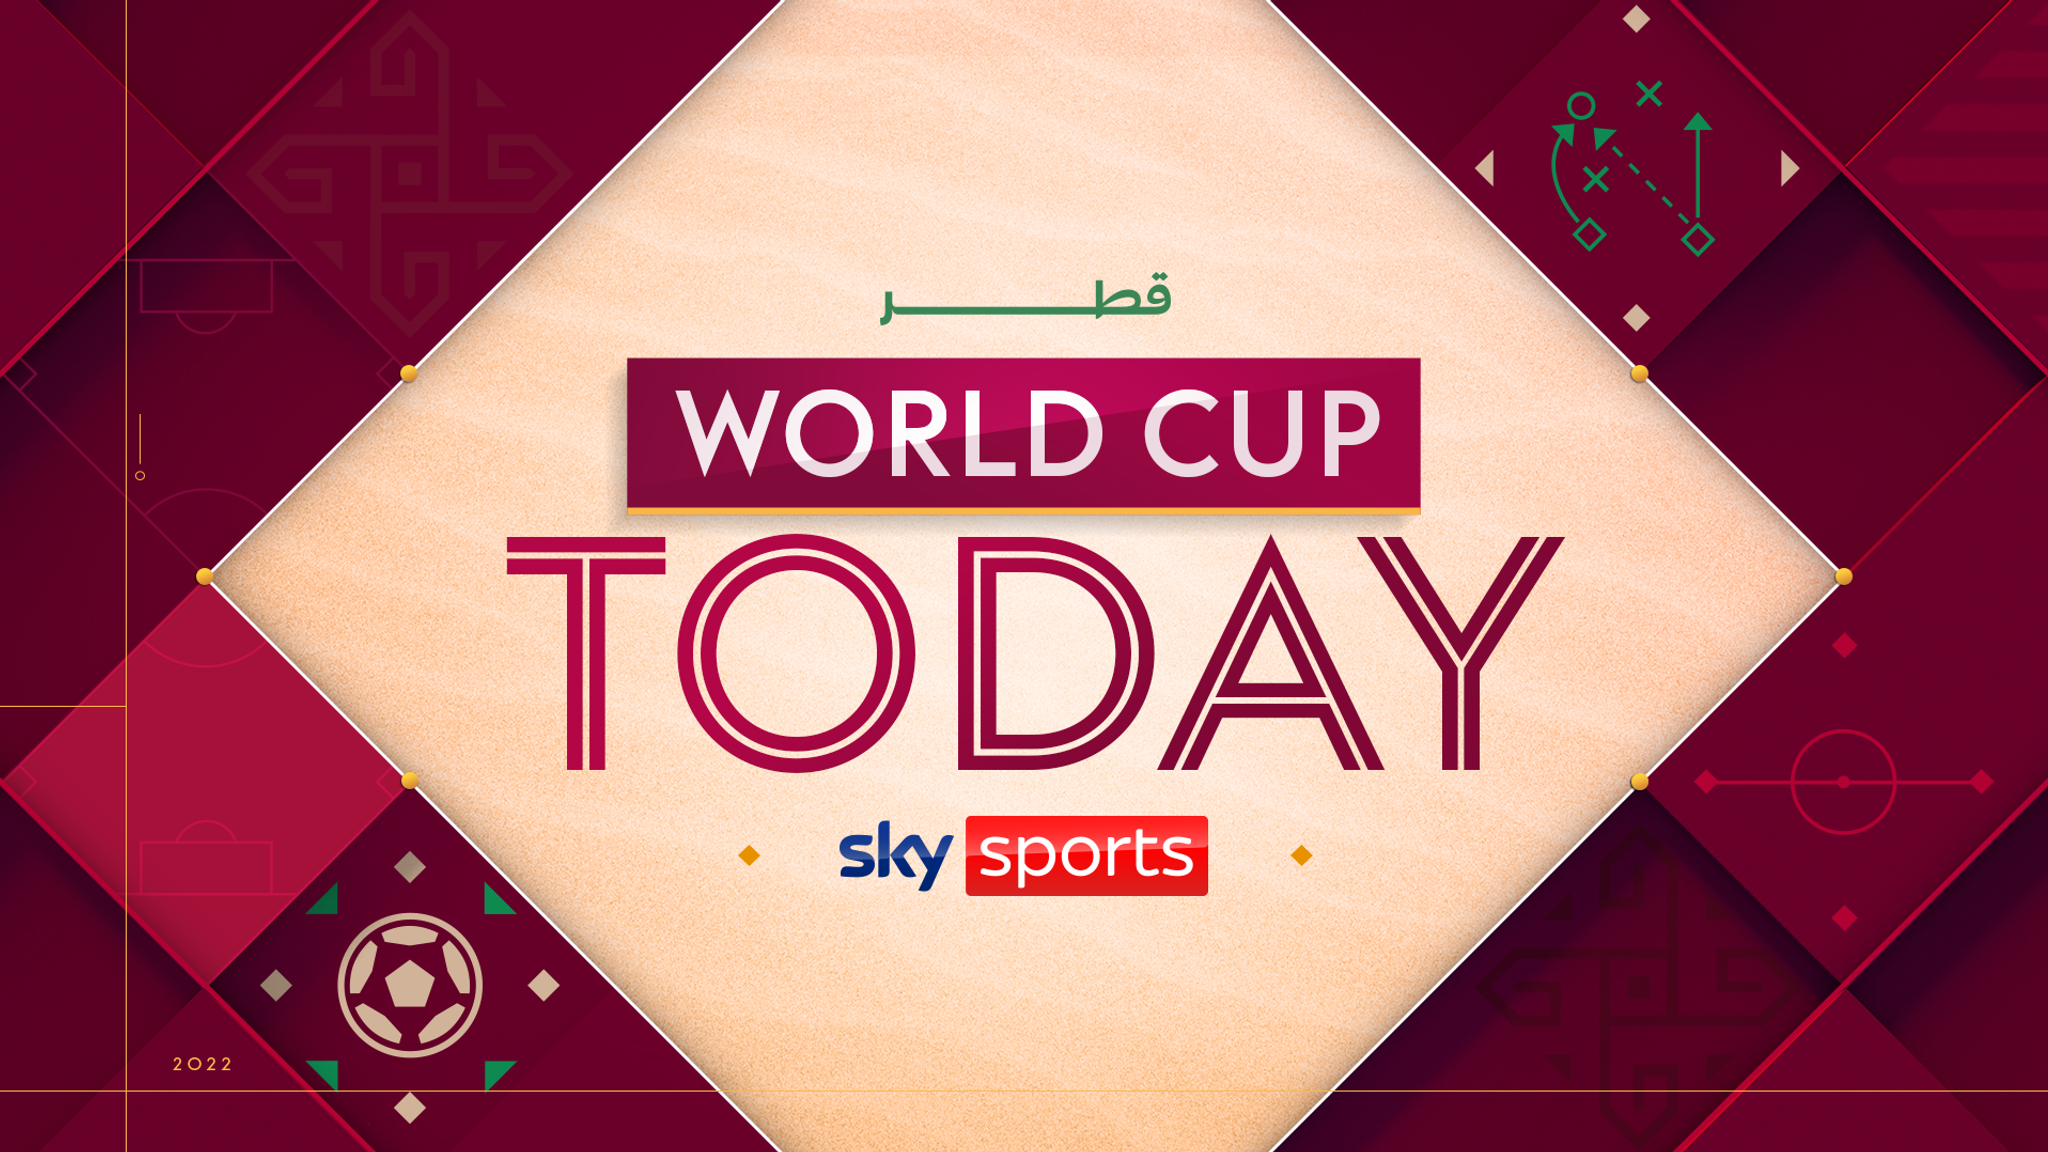 Today at the 2022 World Cup Neymar, Cristiano Ronaldo and Heung-Min Son to feature with Brazil, Portugal and South Korea Football News Sky Sports